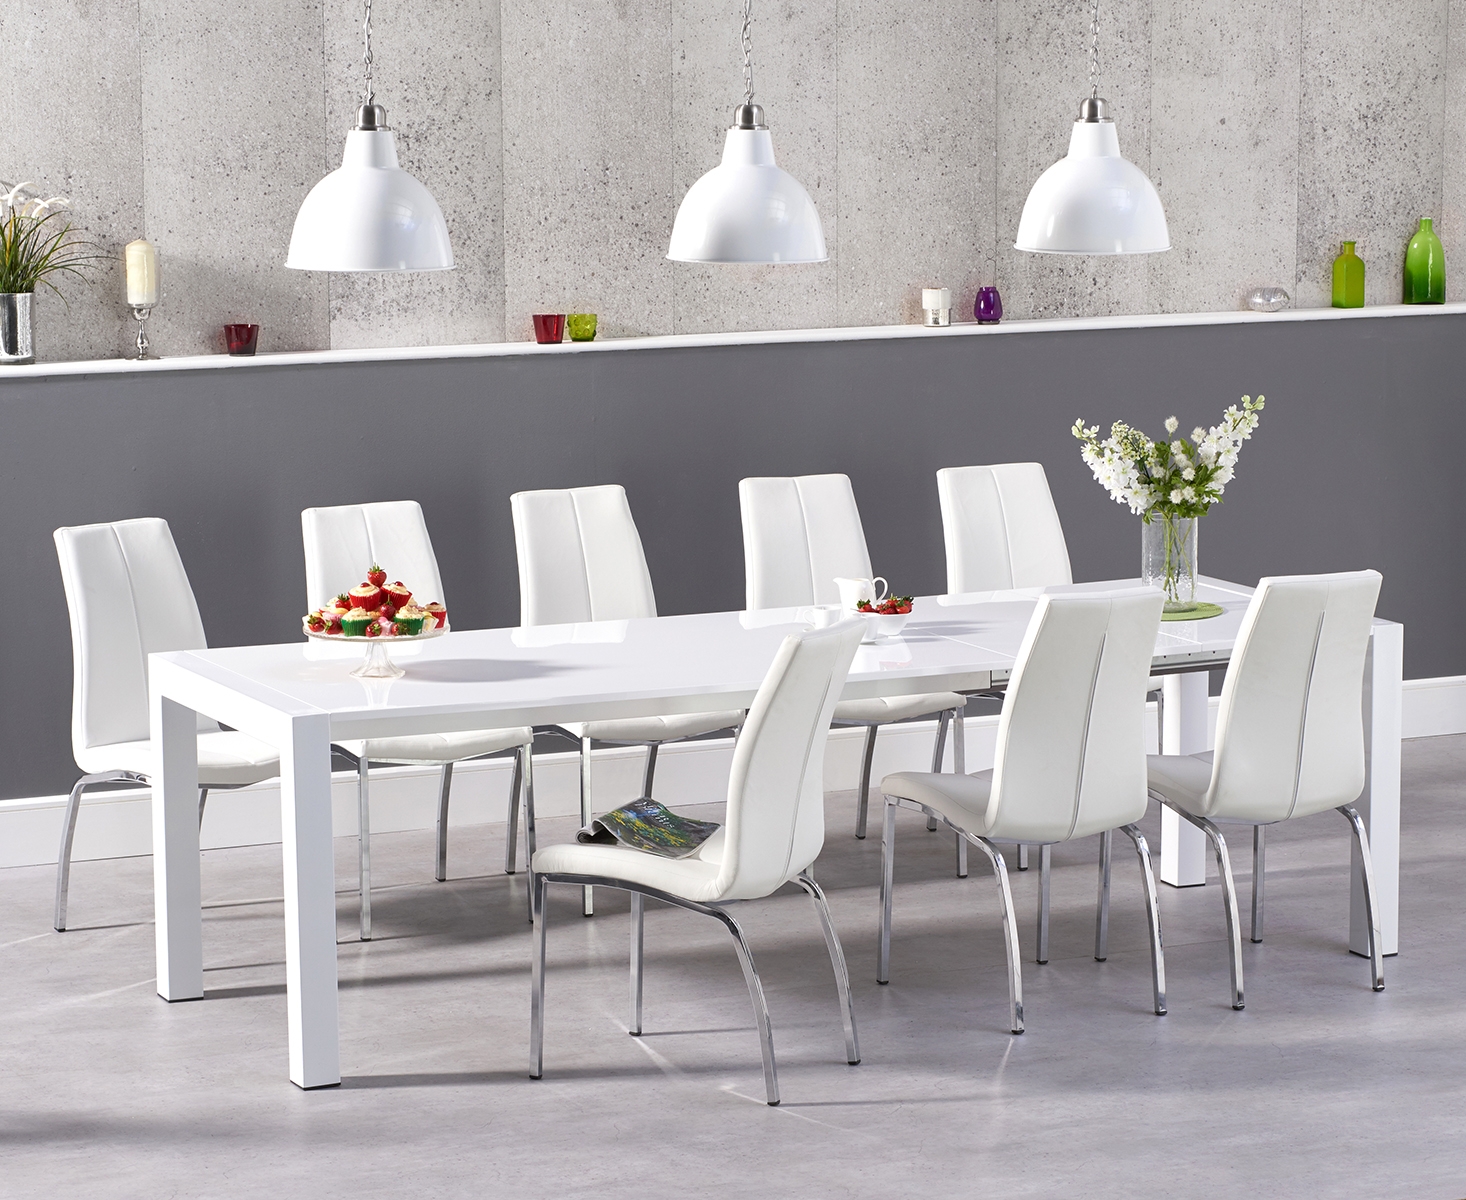 Extending Cleveland White High Gloss Dining Table With 8 Ivory White Marco Chairs